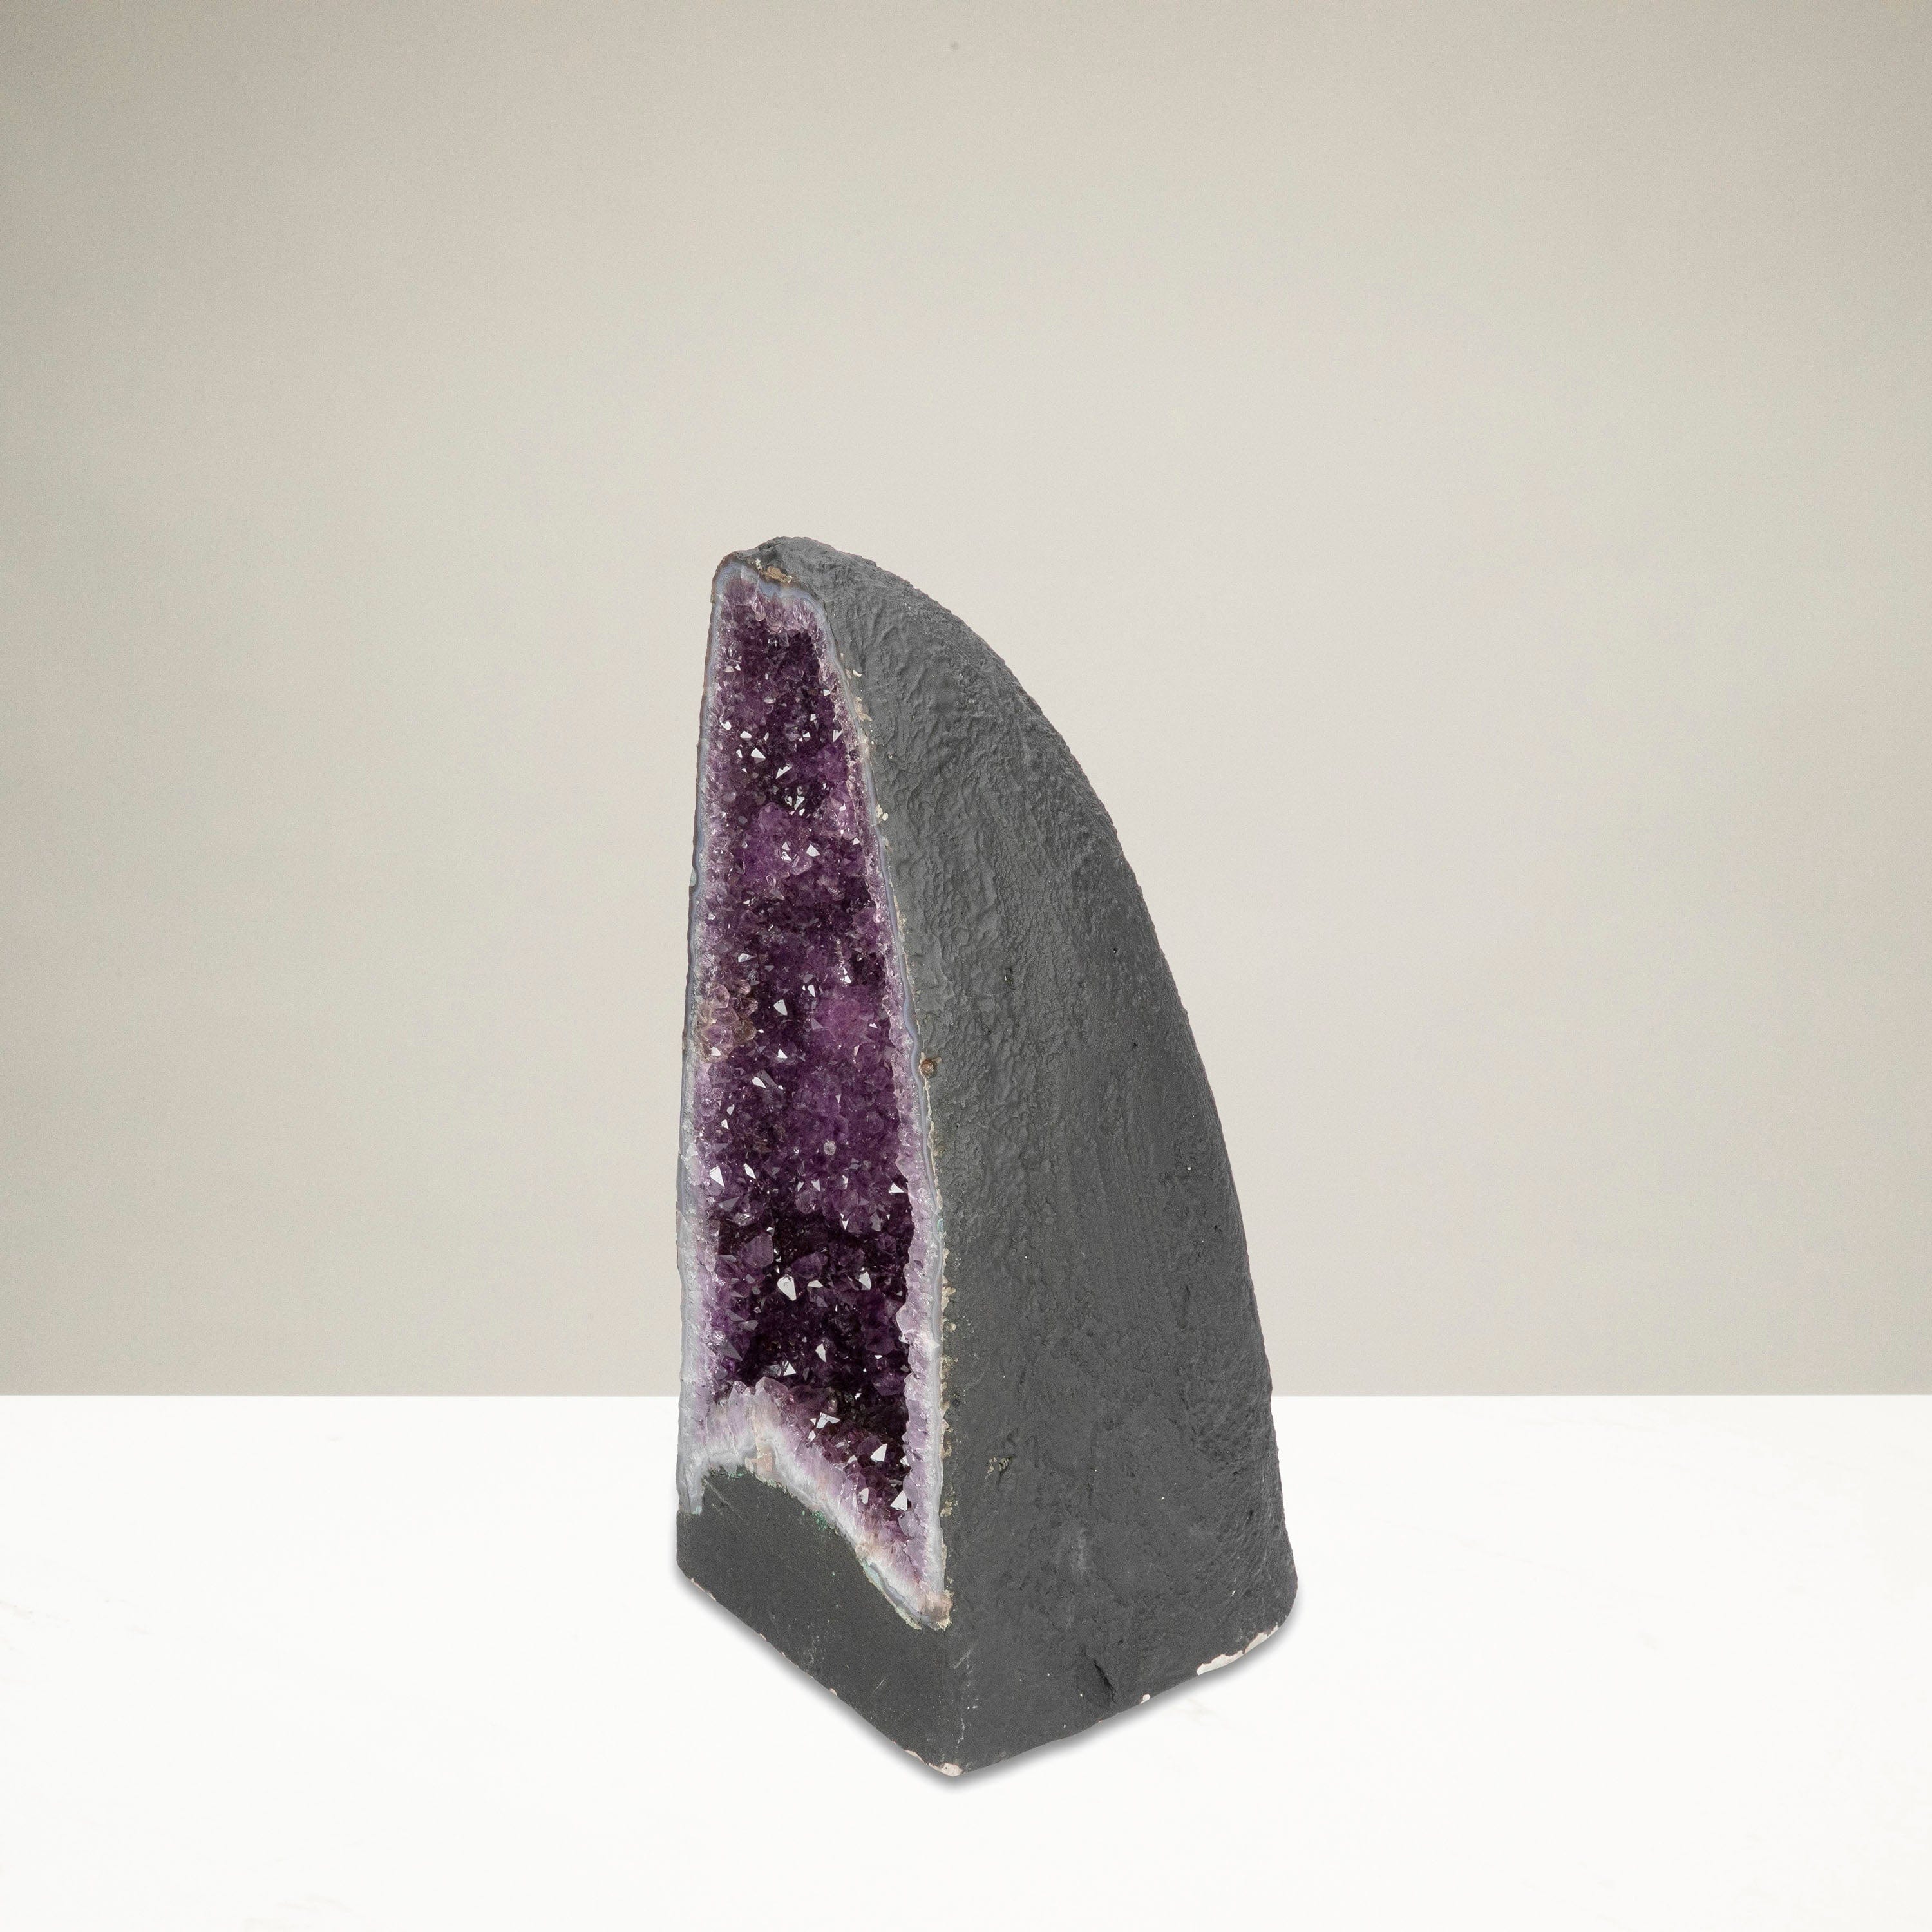 Kalifano Amethyst Amethyst Geode Cathedral - 19" / 49 lbs BAG8000.006